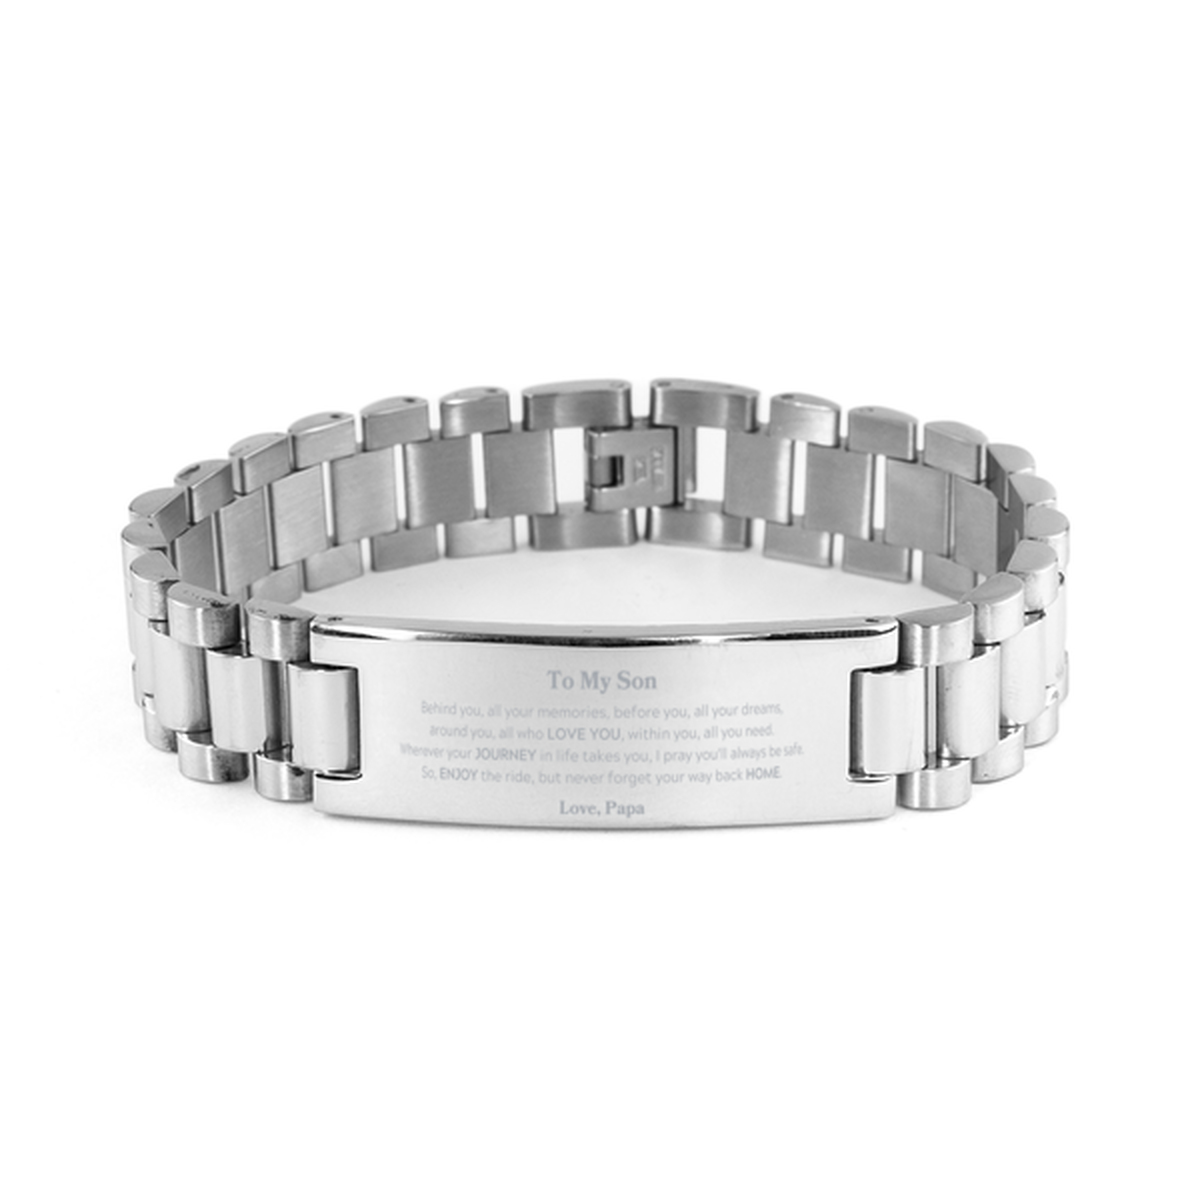 To My Son Graduation Gifts from Papa, Son Ladder Stainless Steel Bracelet Christmas Birthday Gifts for Son Behind you, all your memories, before you, all your dreams. Love, Papa